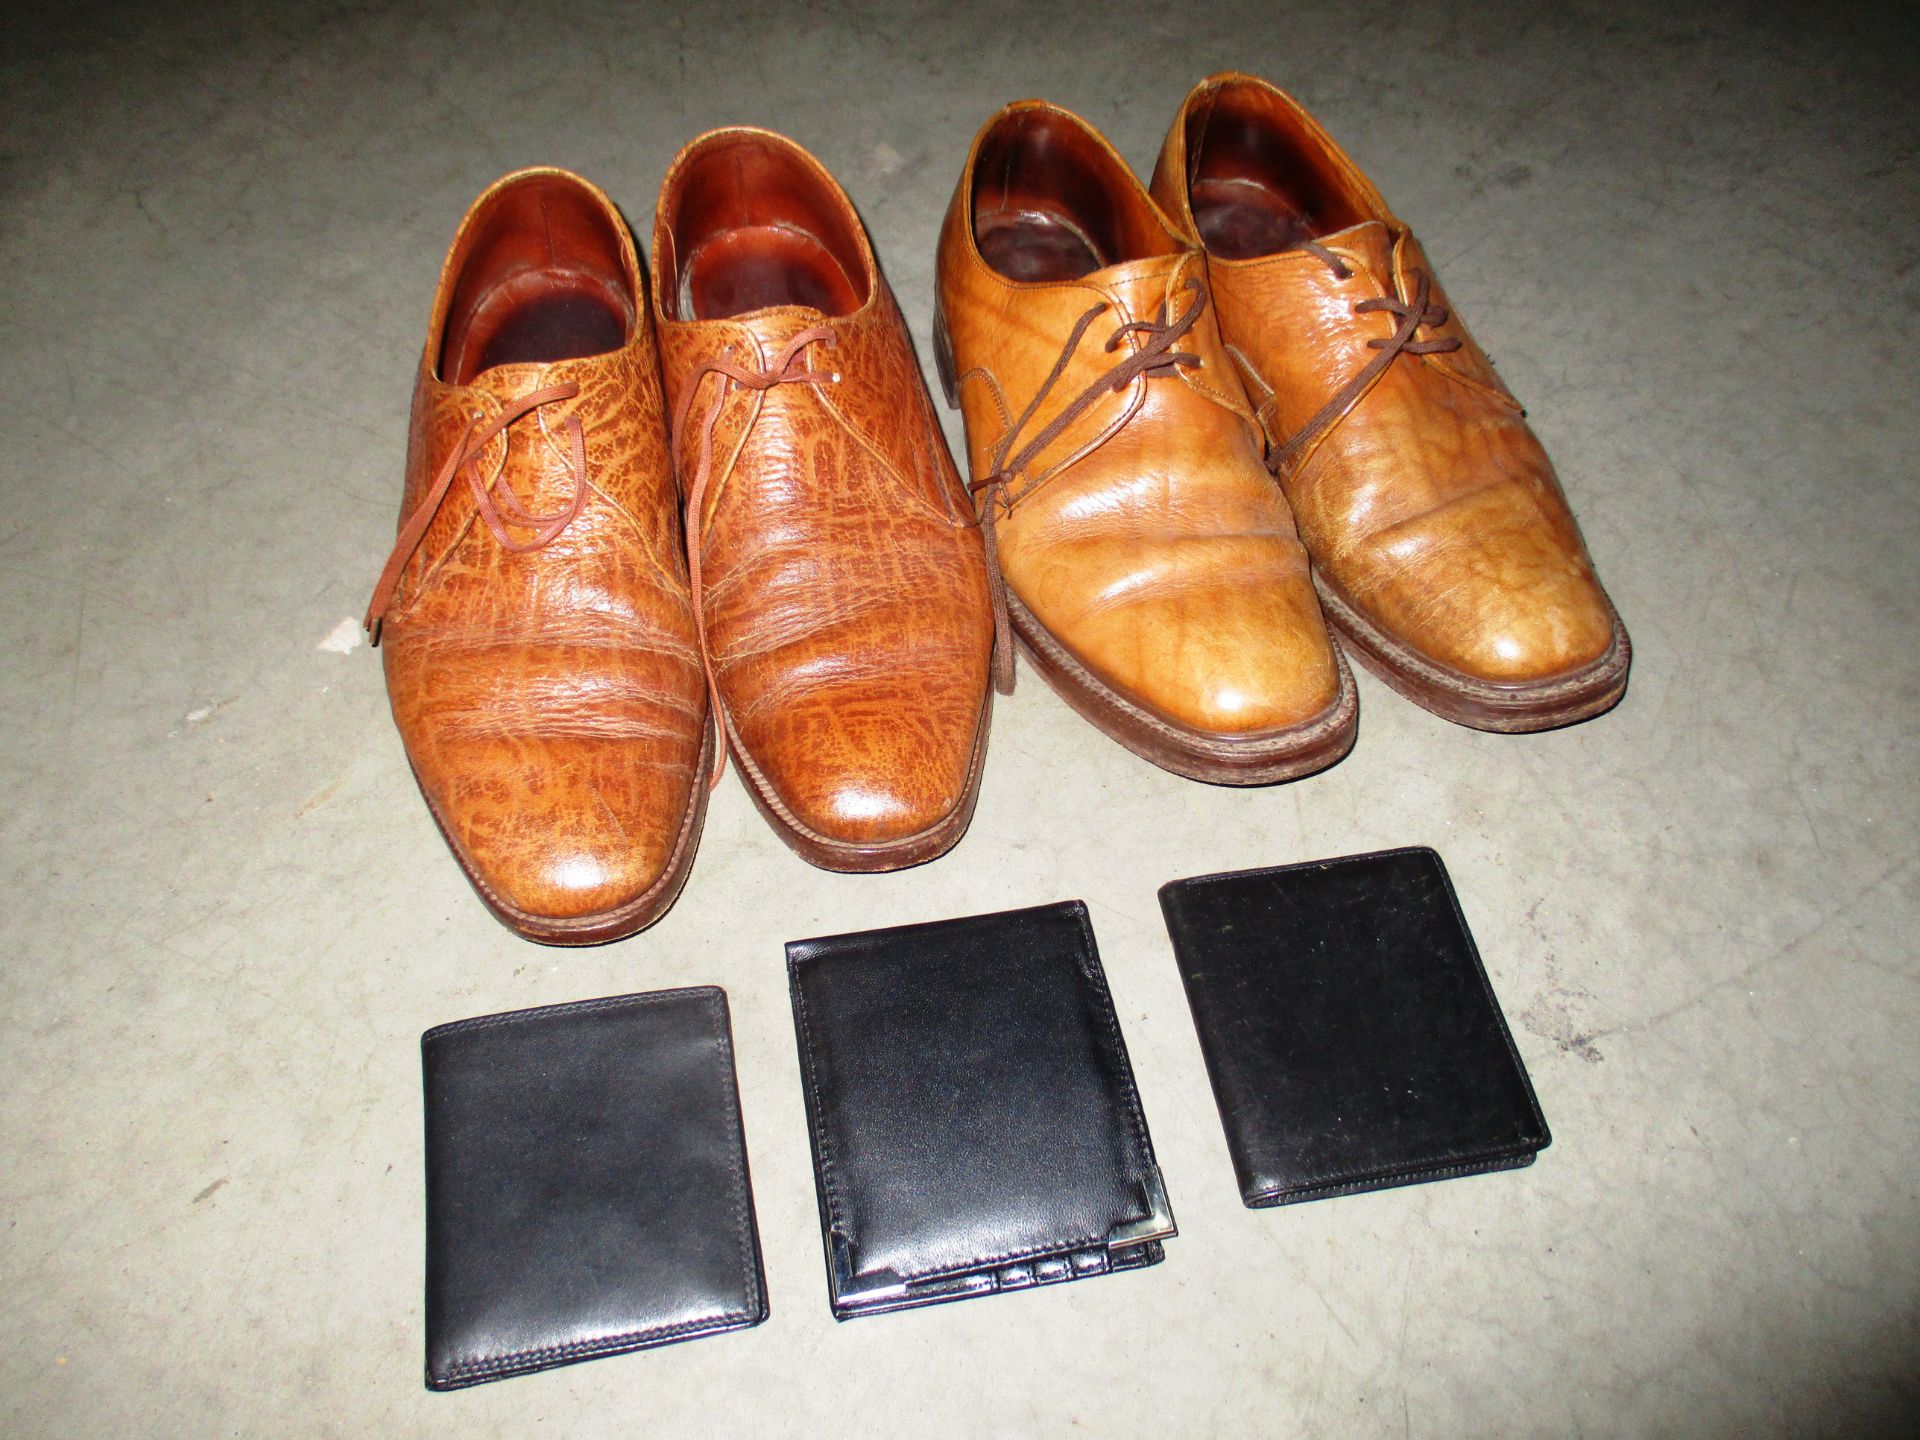 Tow pairs of men's brown leather shoes by Grenson and Mister Sargent size 8 and 3 black leather